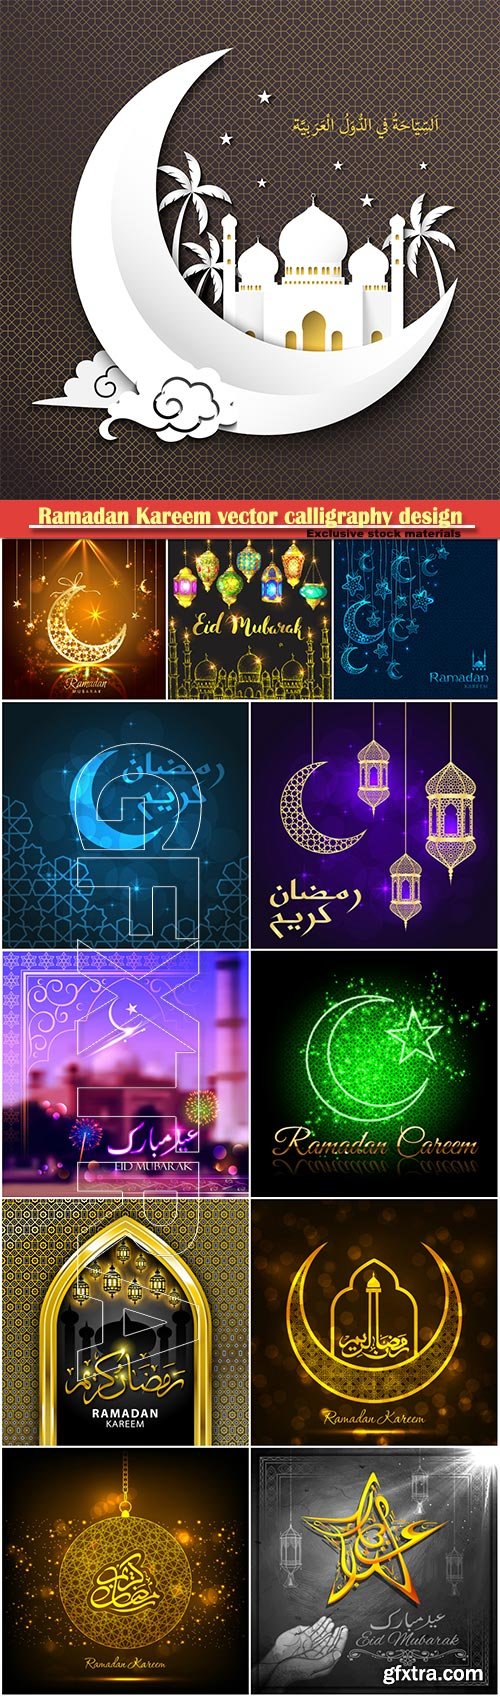 Ramadan Kareem vector calligraphy design with decorative floral pattern, mosque silhouette, crescent and glittering islamic background # 20